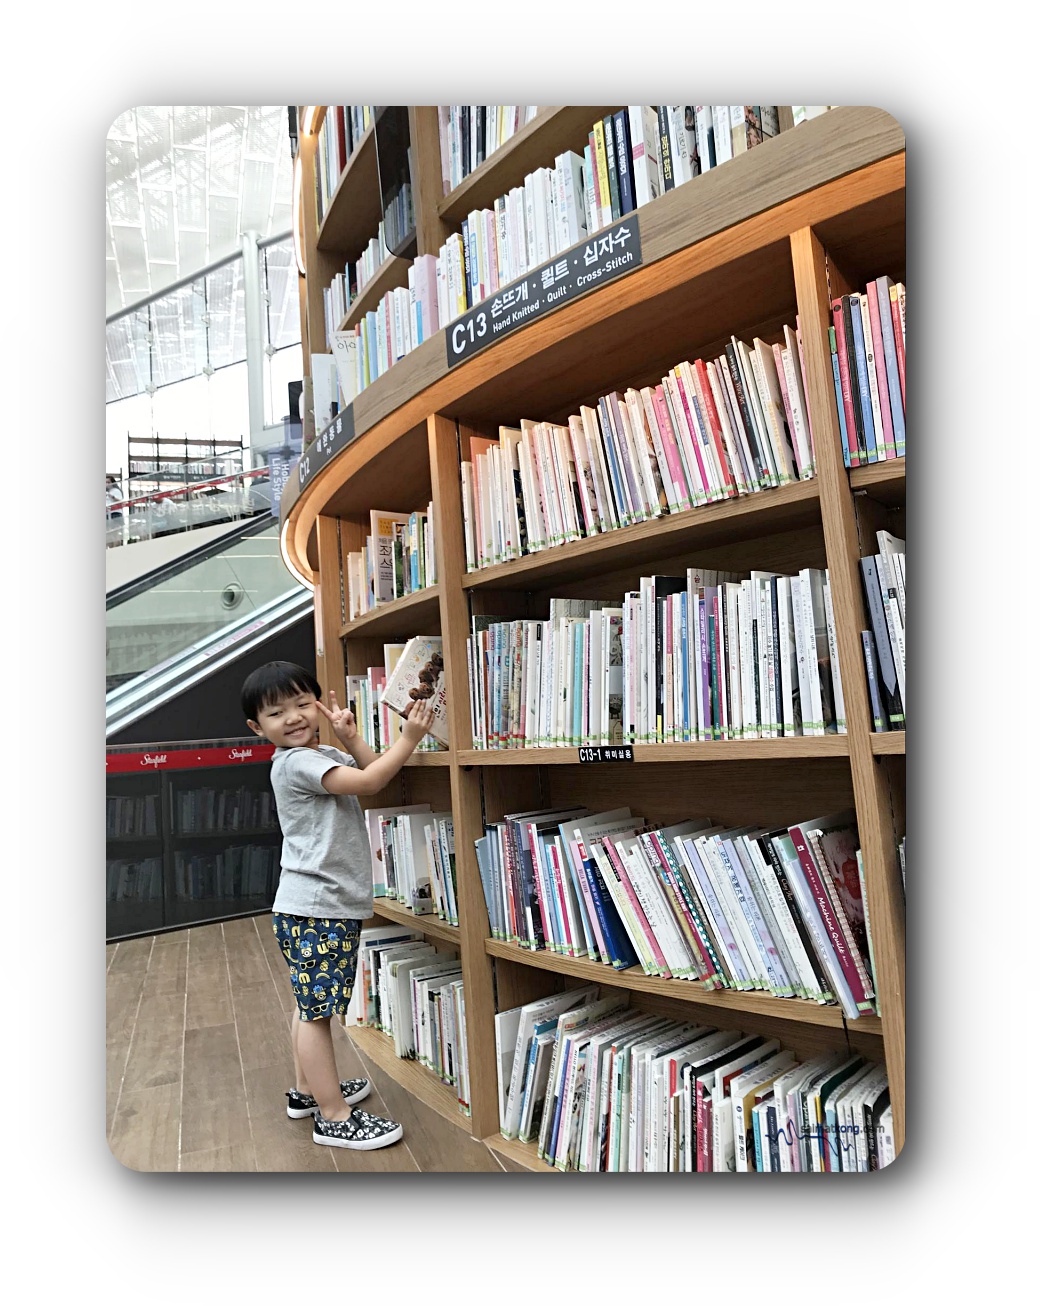 Seoul Trip 2019 Awesome Summer in Seoul - Starfield Library is one of the attractions in Gangnam district. Located in COEX Mall, Starfield Library is a public library with more than 50,000 books and magazines.